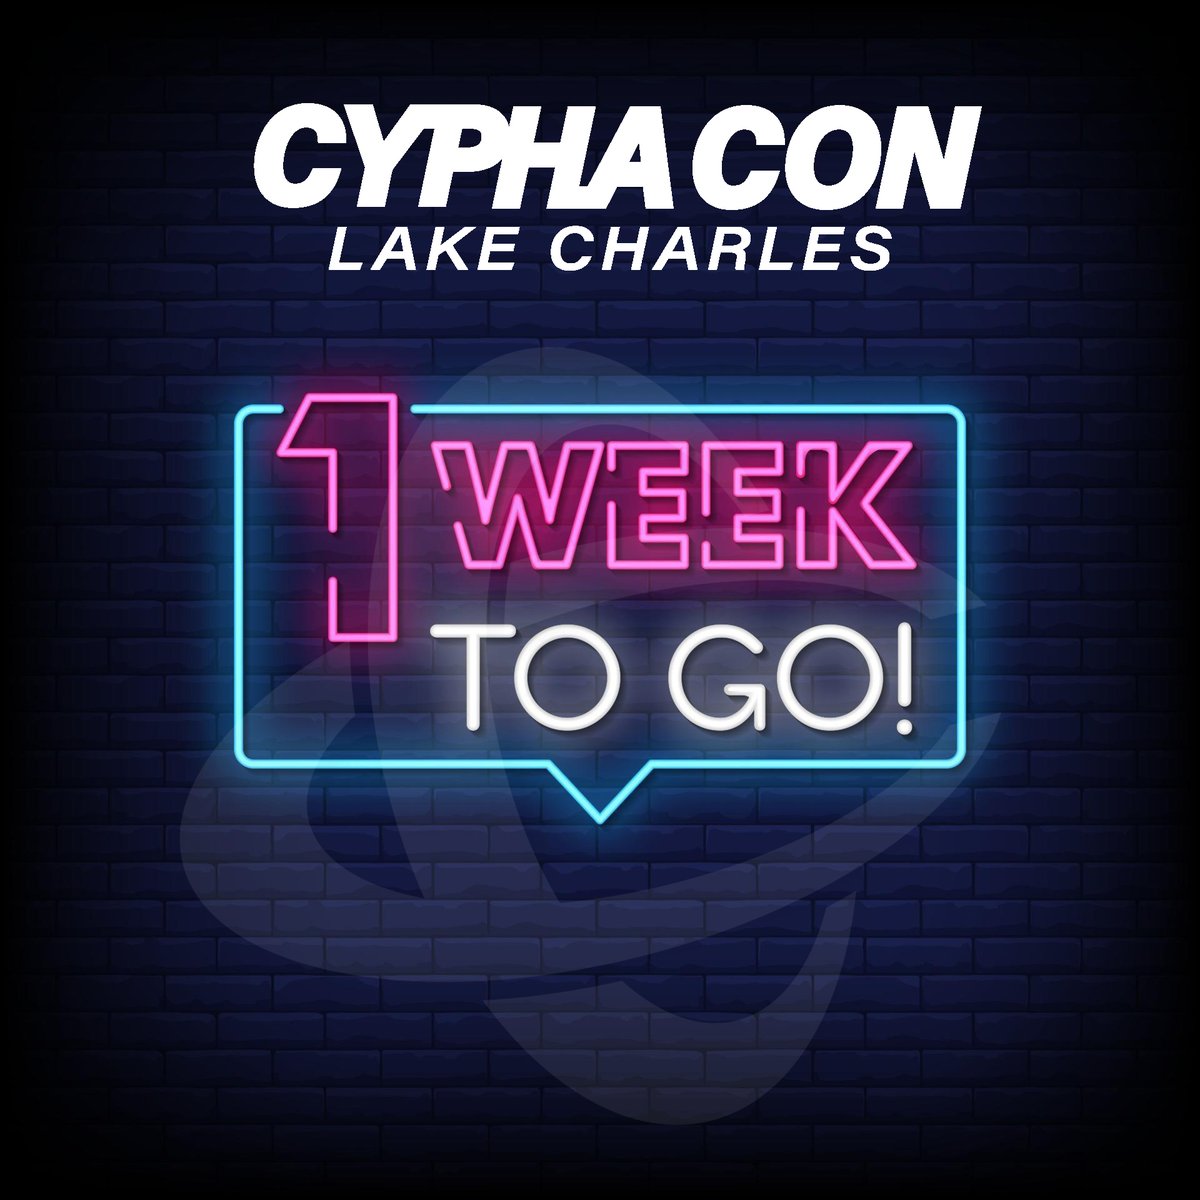 The Countdown is NOW! 7 Days until CYPHACON 2024!!! Please follow our official CYPHACON 2024 Event Page fb.me/e/1i63x7d1W CYPHACON takes place April 5th-7th, 2024 at the Lake Charles Event Center in Lake Charles Louisiana.